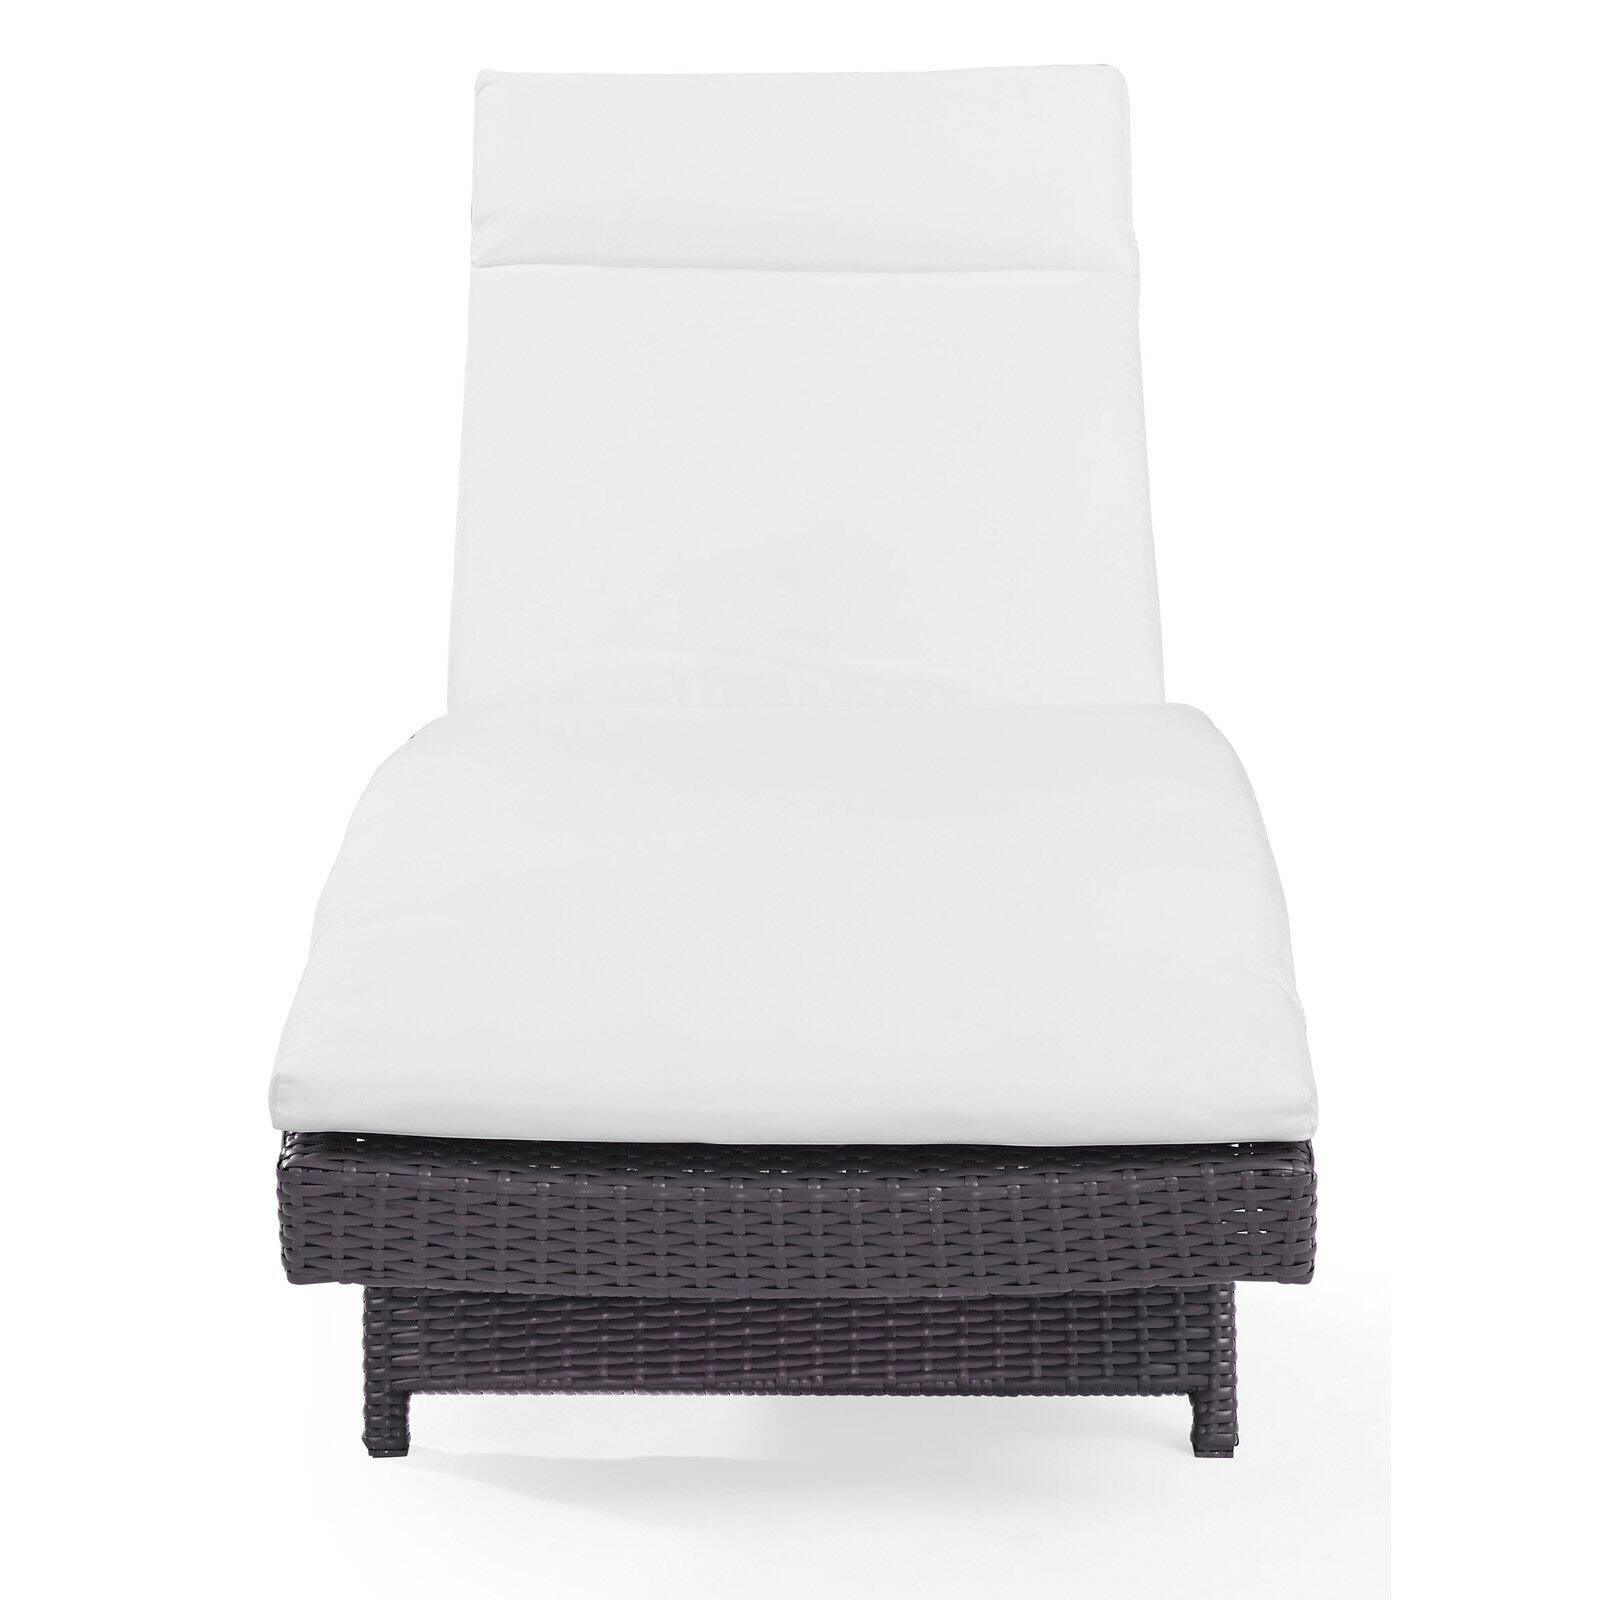 Crosley Biscayne Patio Chaise Lounge in Brown and White - image 4 of 9